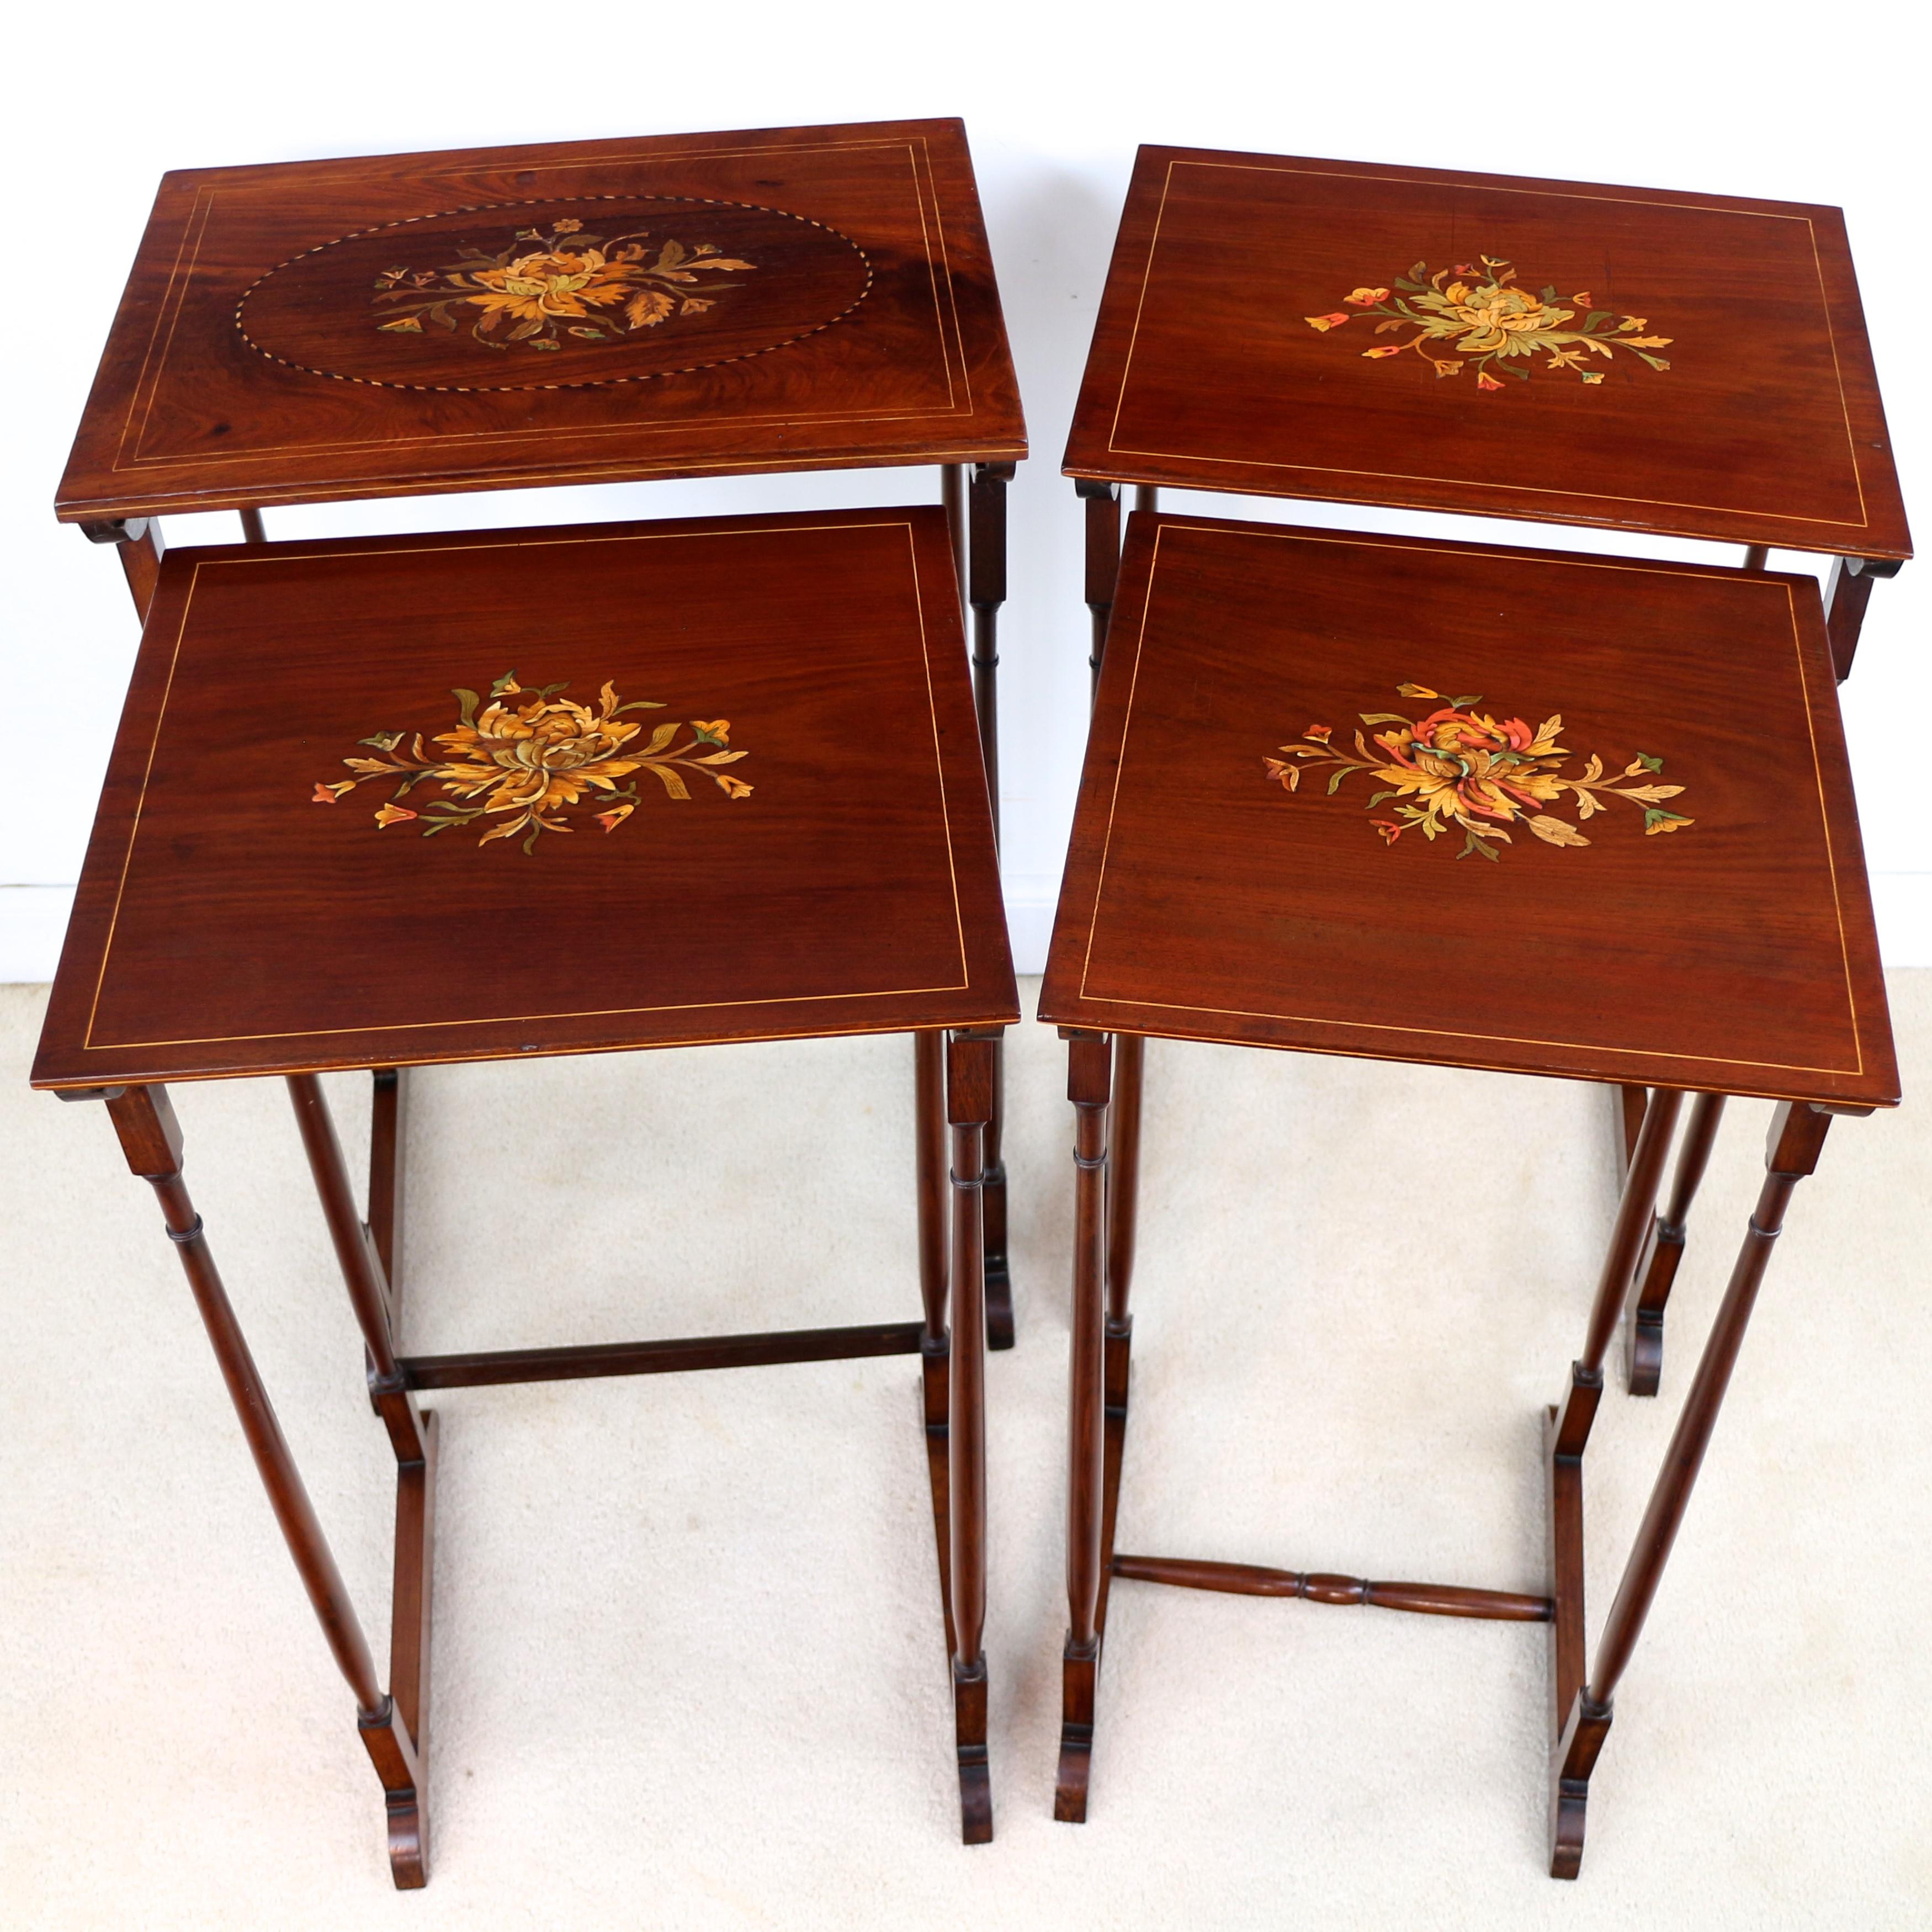 Set of Antique English Victorian Mahogany and Marquetry Inlaid Quartetto Tables For Sale 3